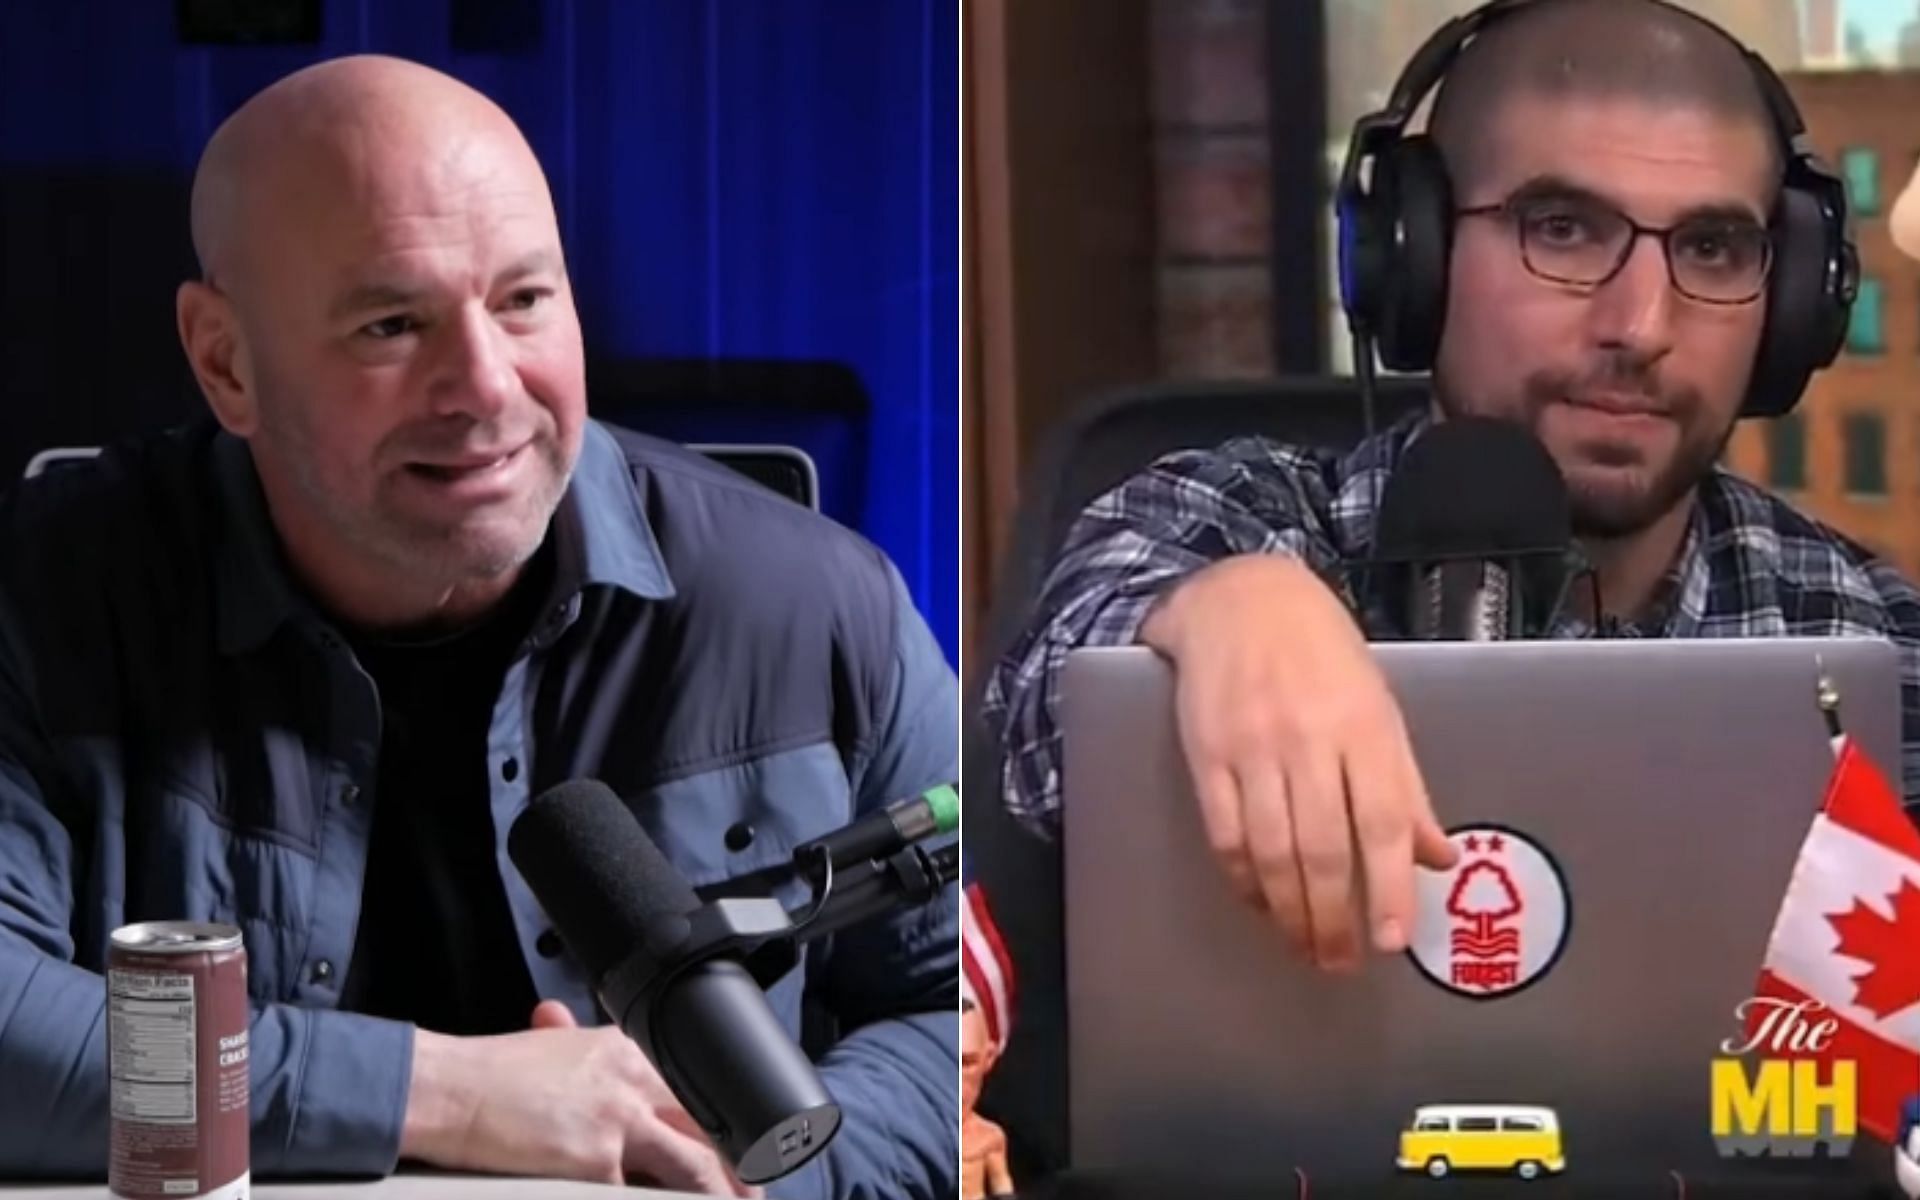 (L) Dana White, and Ariel Helwani (R) {Photo credit: Paddy The Baddy - YouTube, and @oocmma - Twitter}